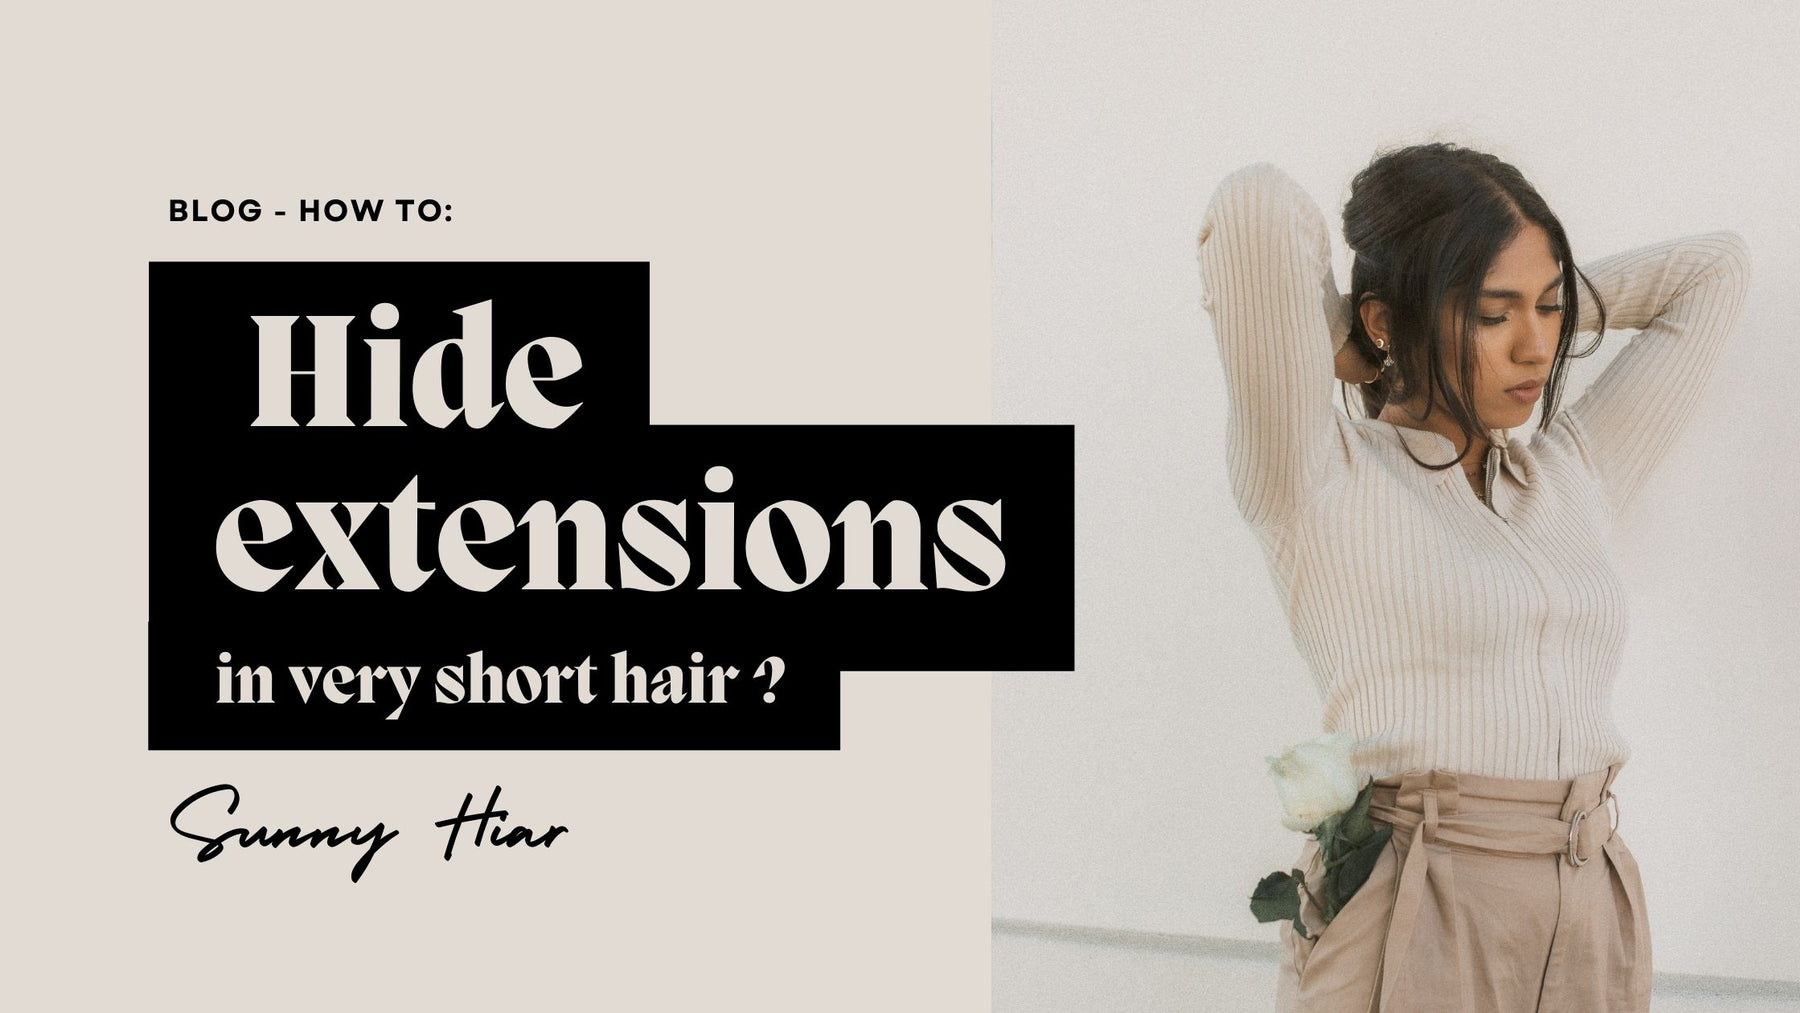 How to Hide Extensions in Very Short Hair?